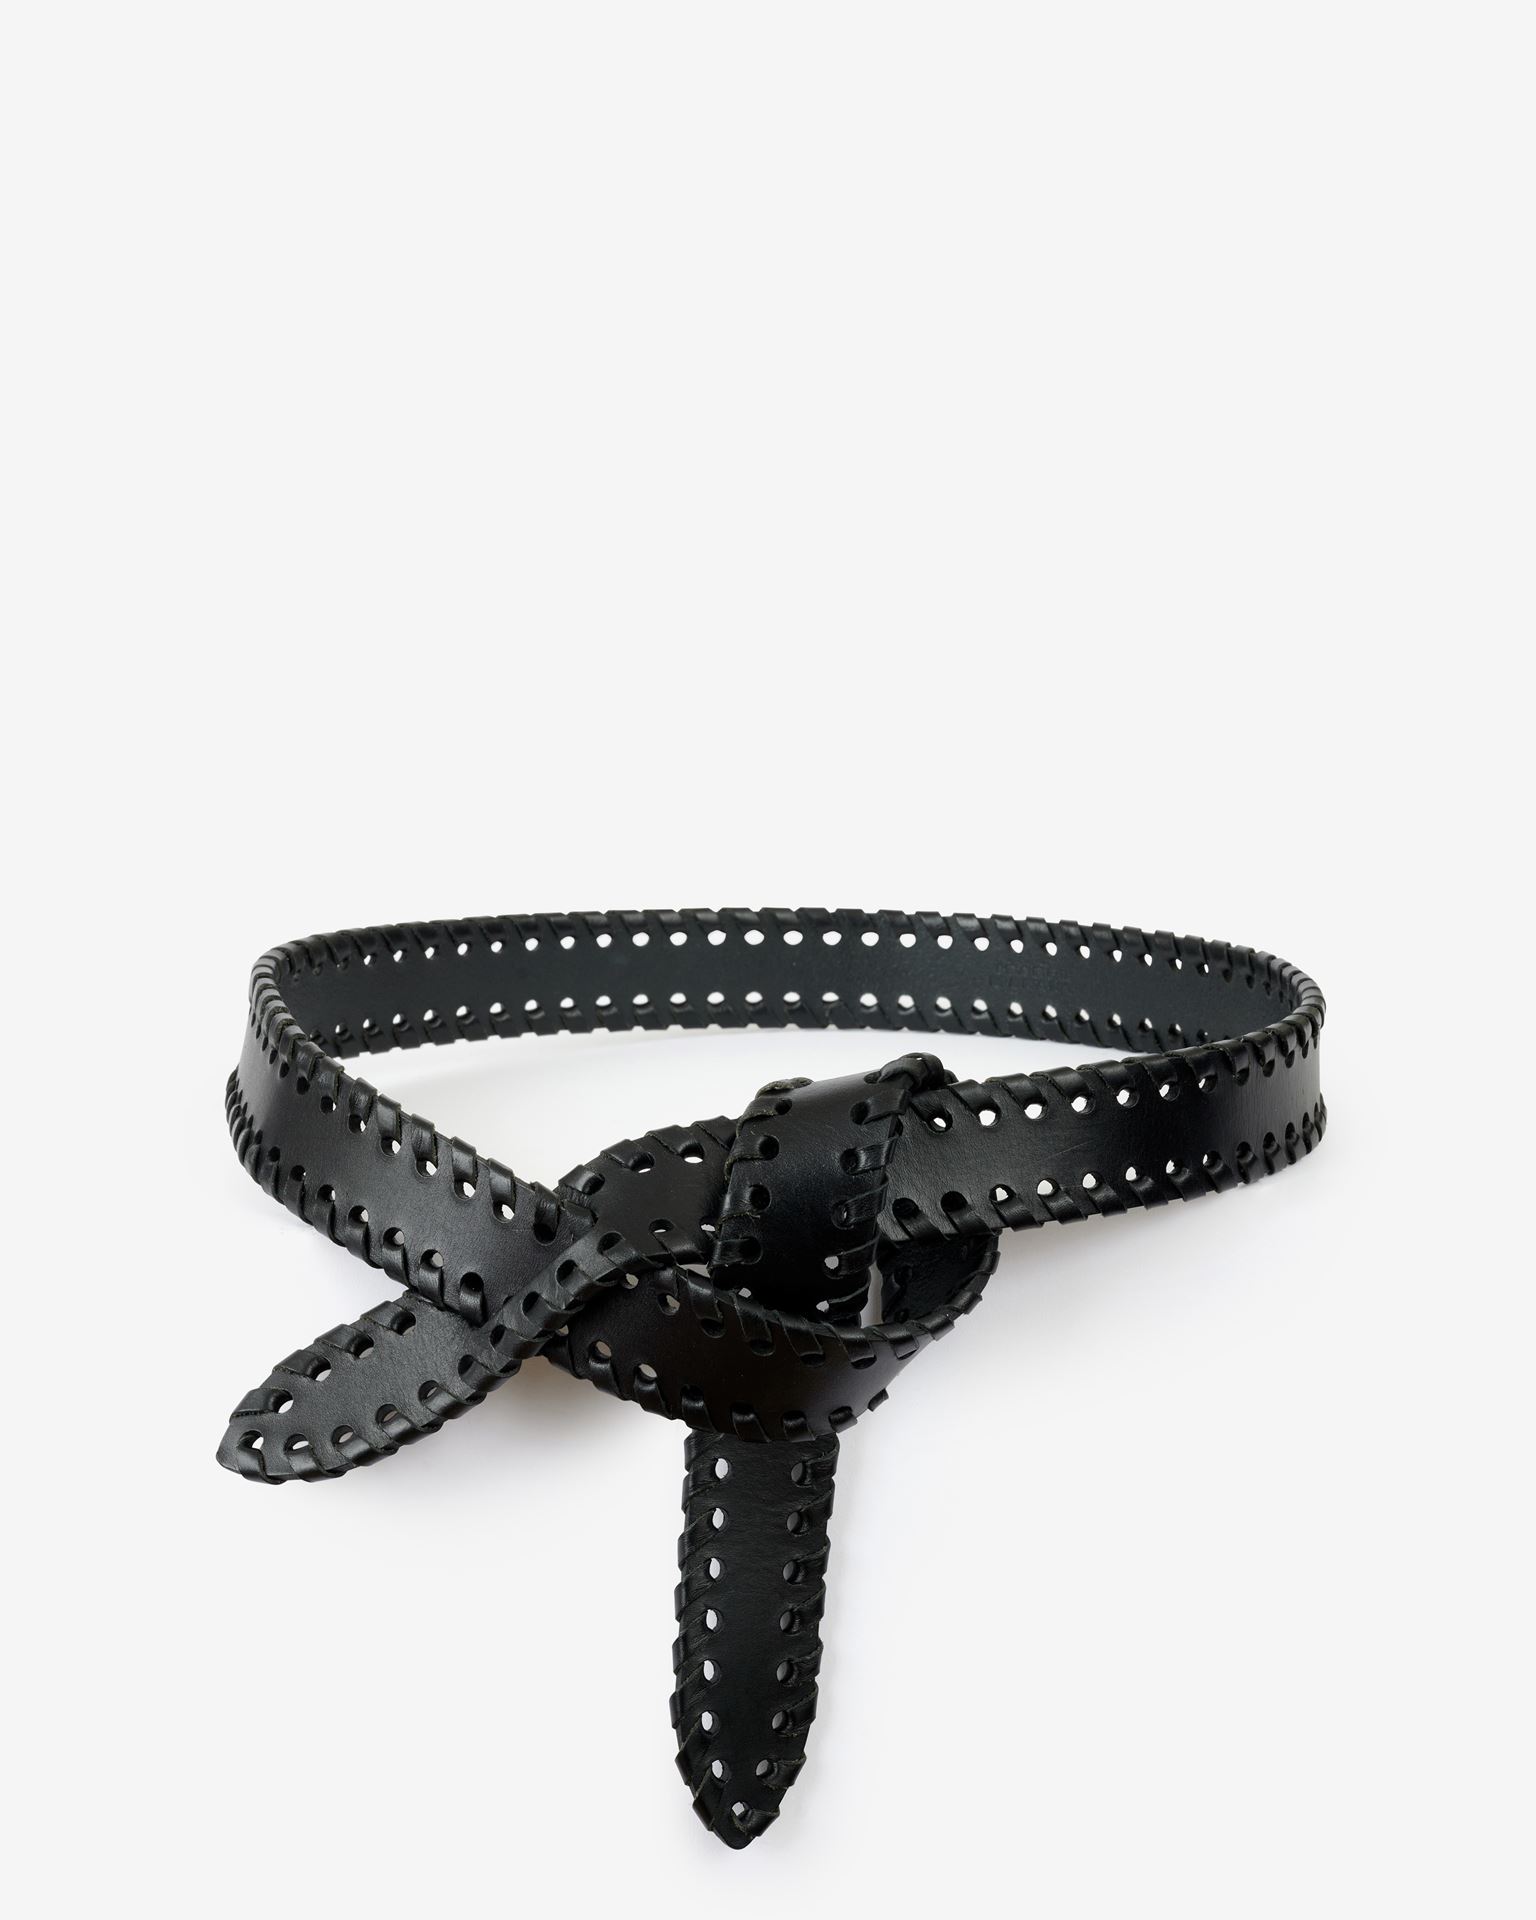 Isabel Marant, Lecce Knotted Leather Belt - Women - Black